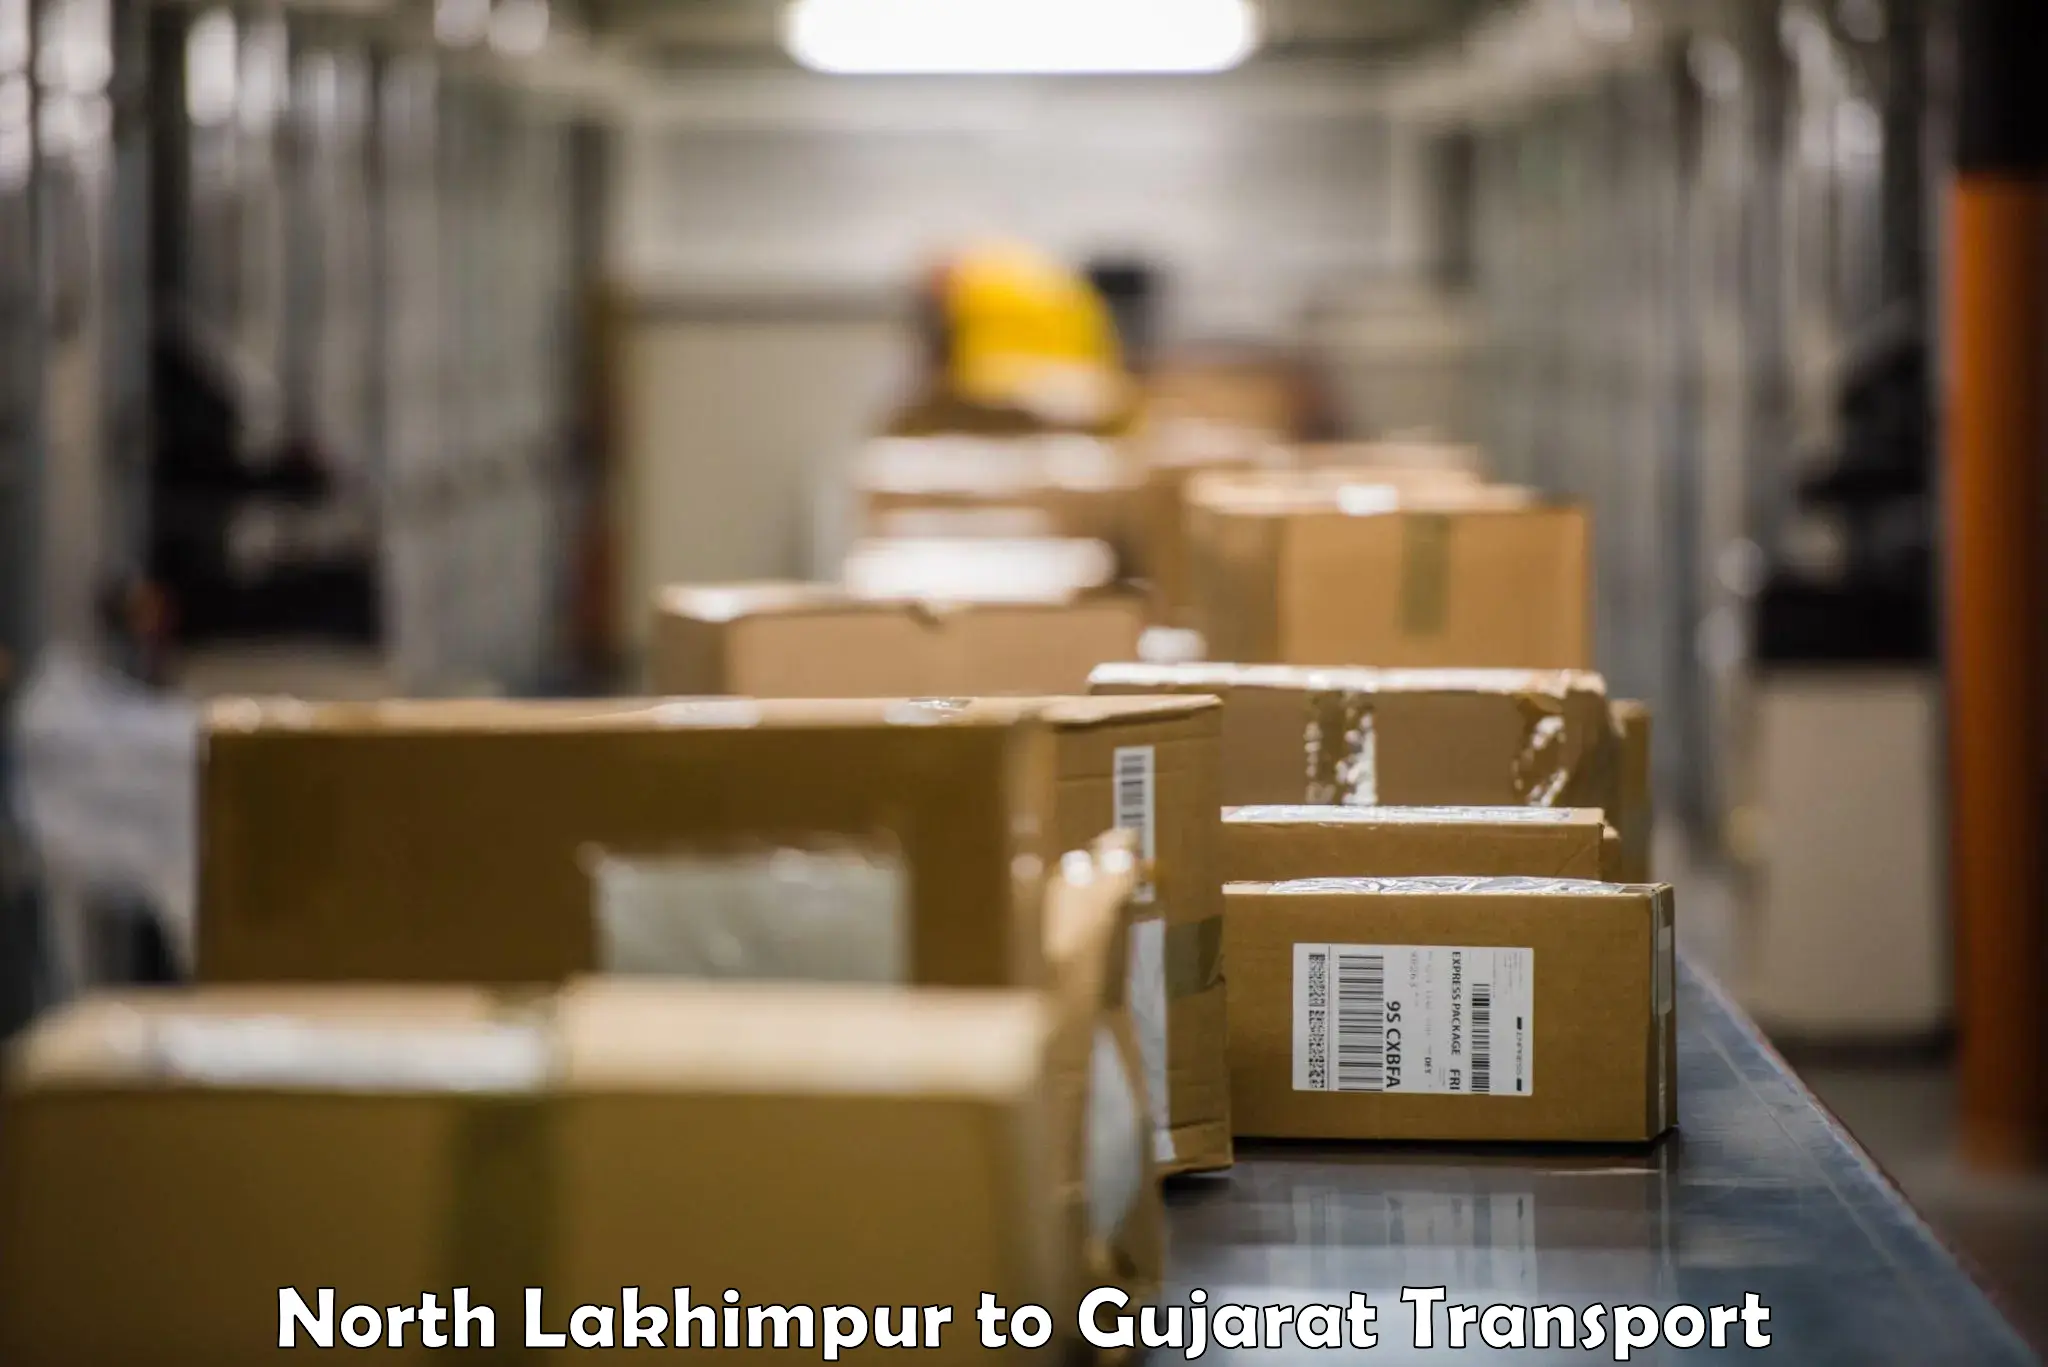 Truck transport companies in India North Lakhimpur to Amreli